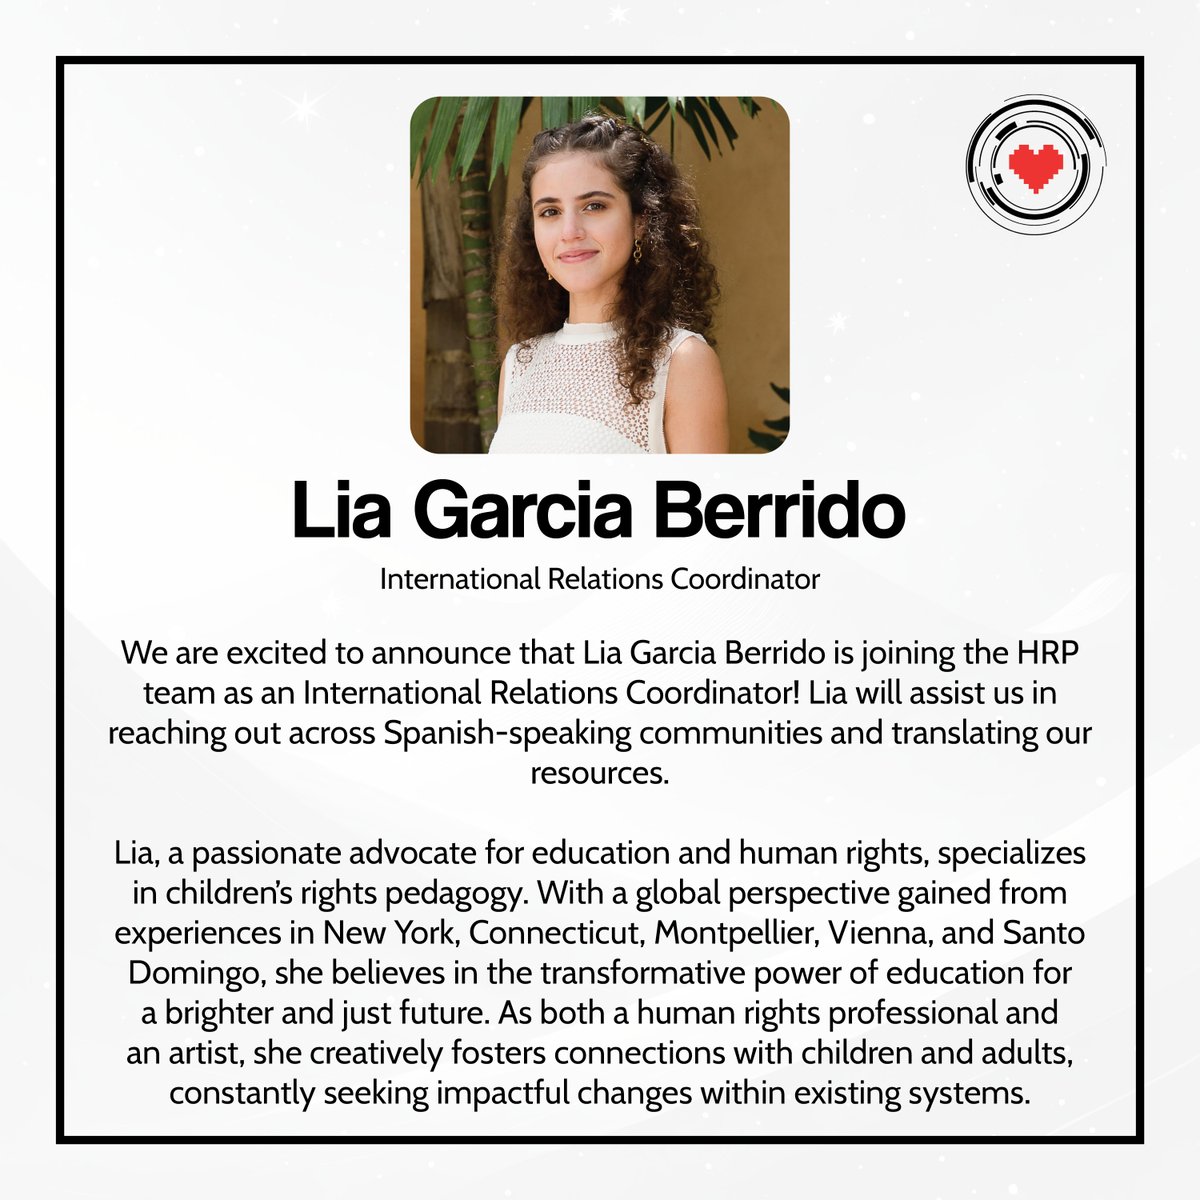 We are excited to announce that Lia Garcia Berrido is joining the HRP team as an International Relations Coordinator! Lia will assist us in reaching out across Spanish-speaking communities and translating our resources.